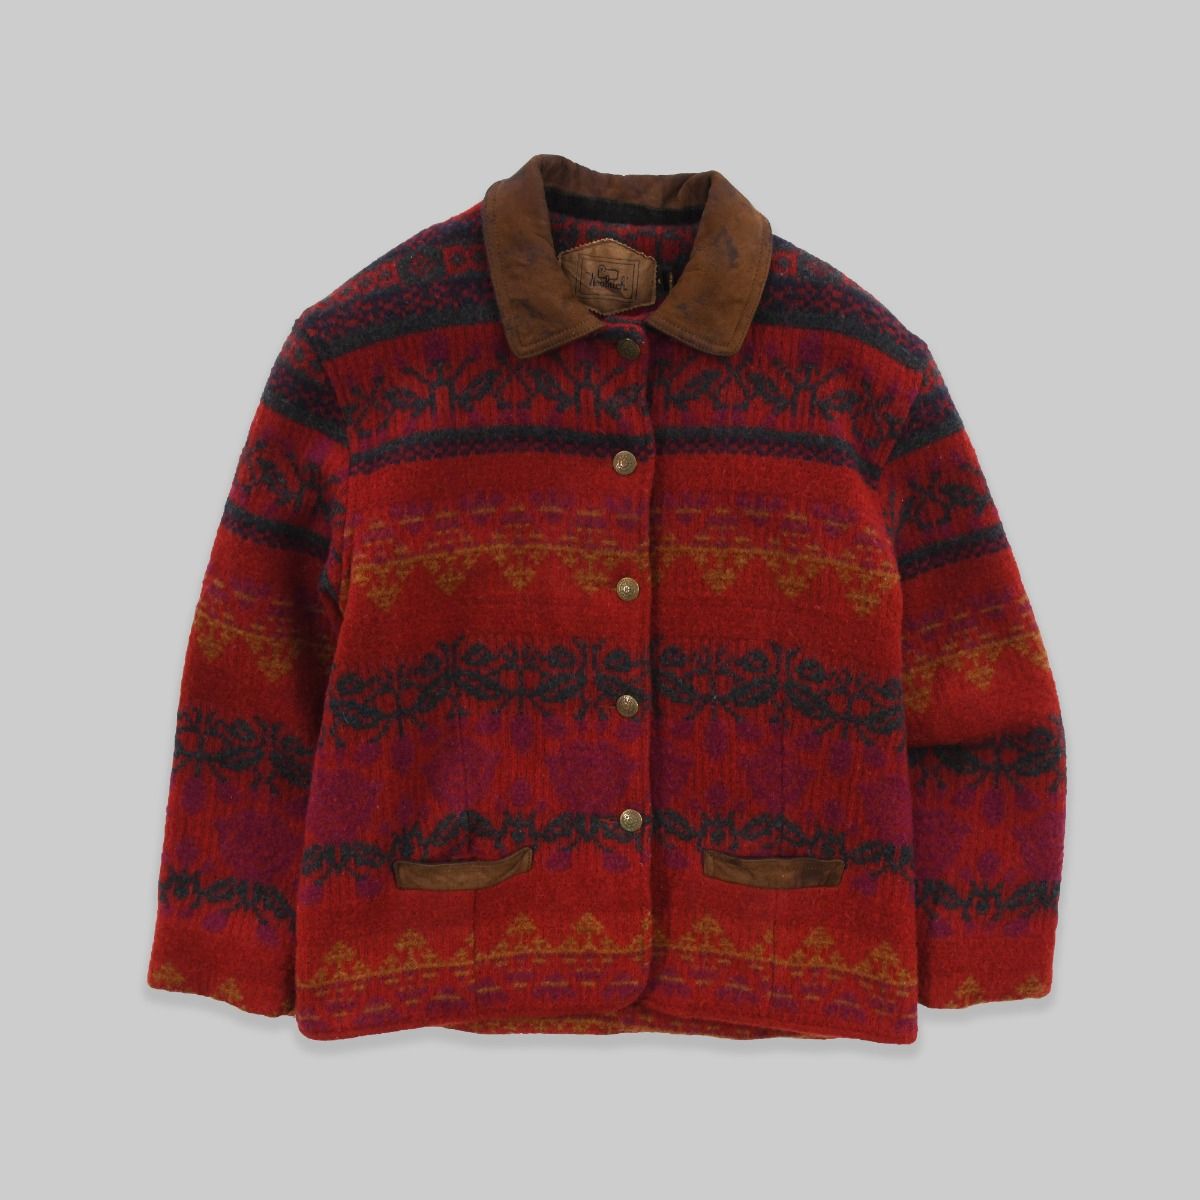 Woolrich 1990s Floral Jacket